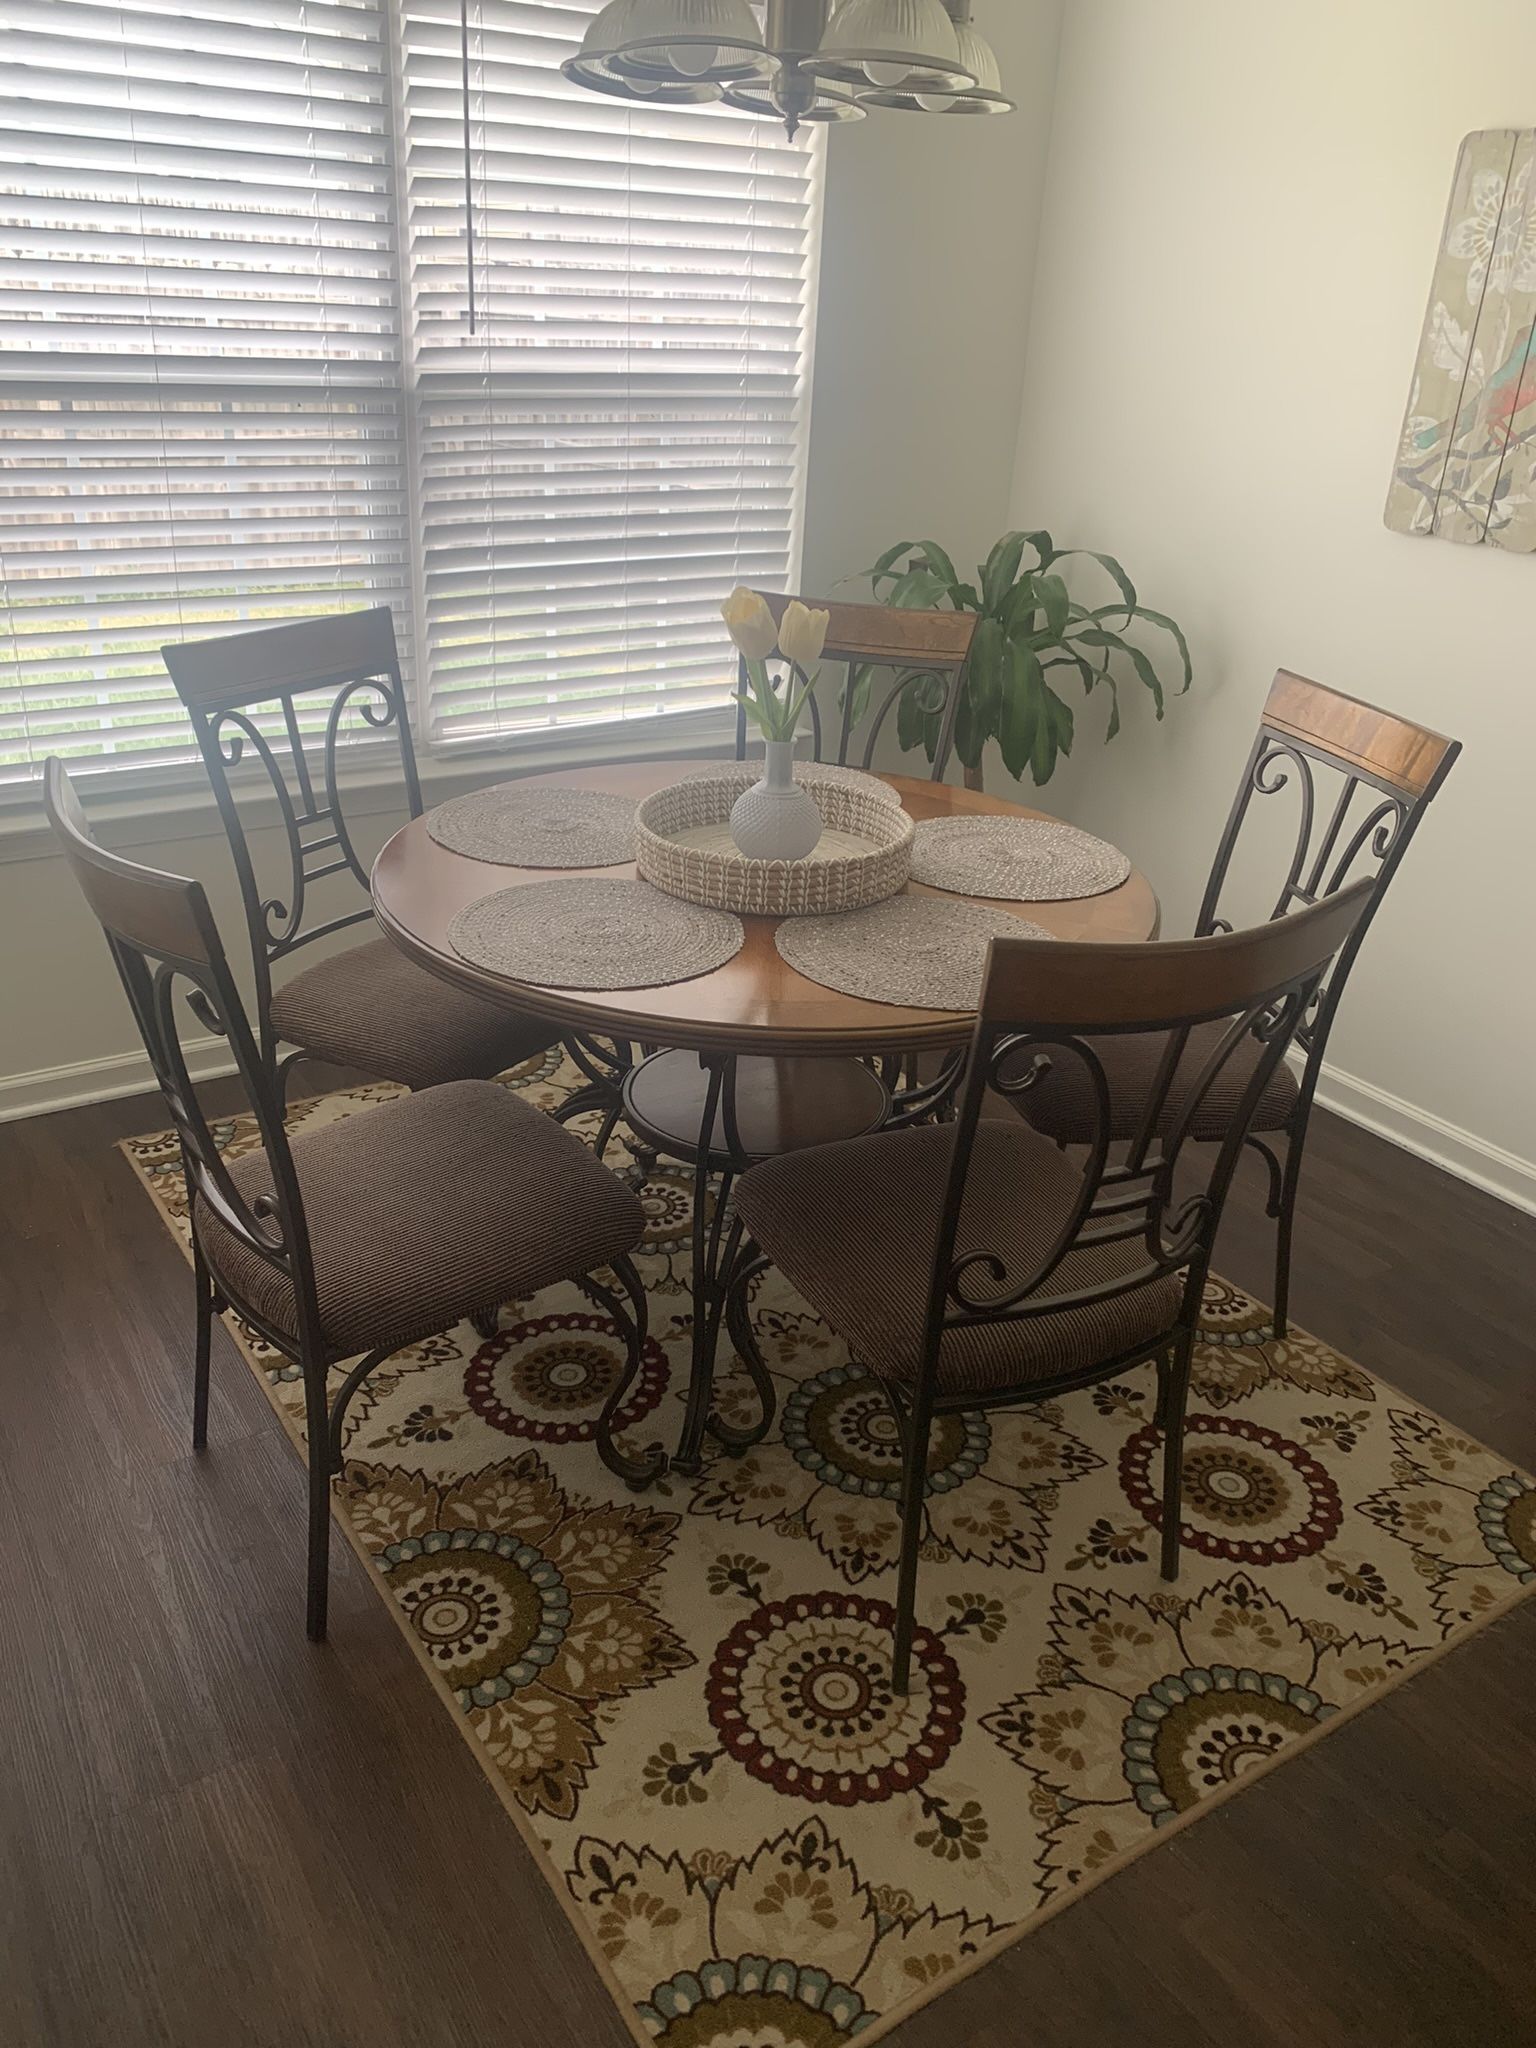 45” Diameter Kitchen Table W/6 Chairs